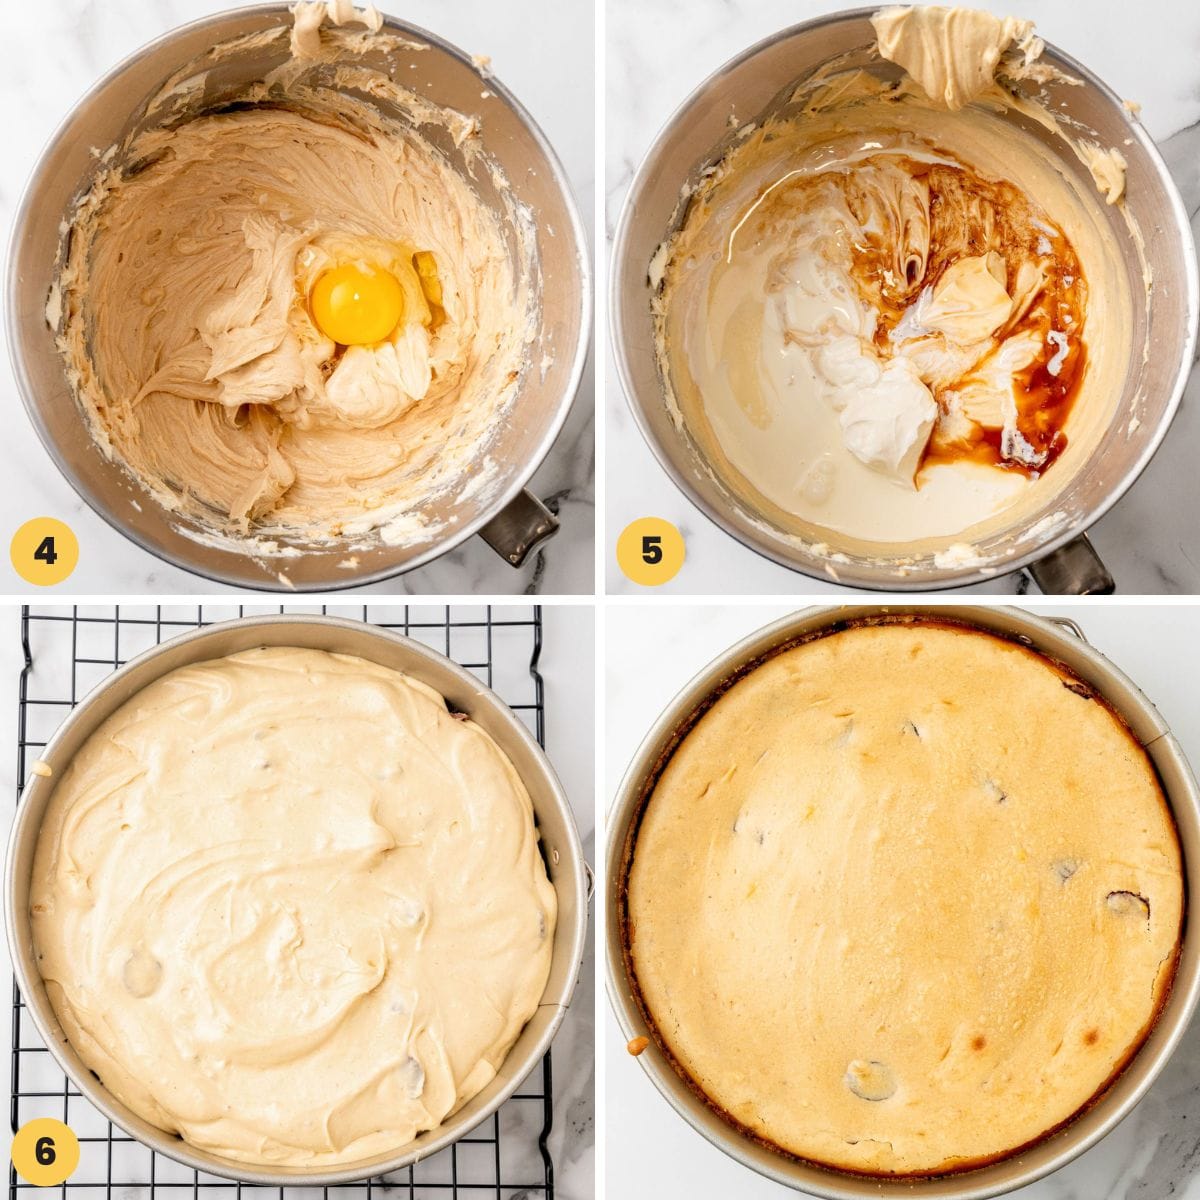 a collage of four images showing how to make Reese's caramel cheesecake from scratch